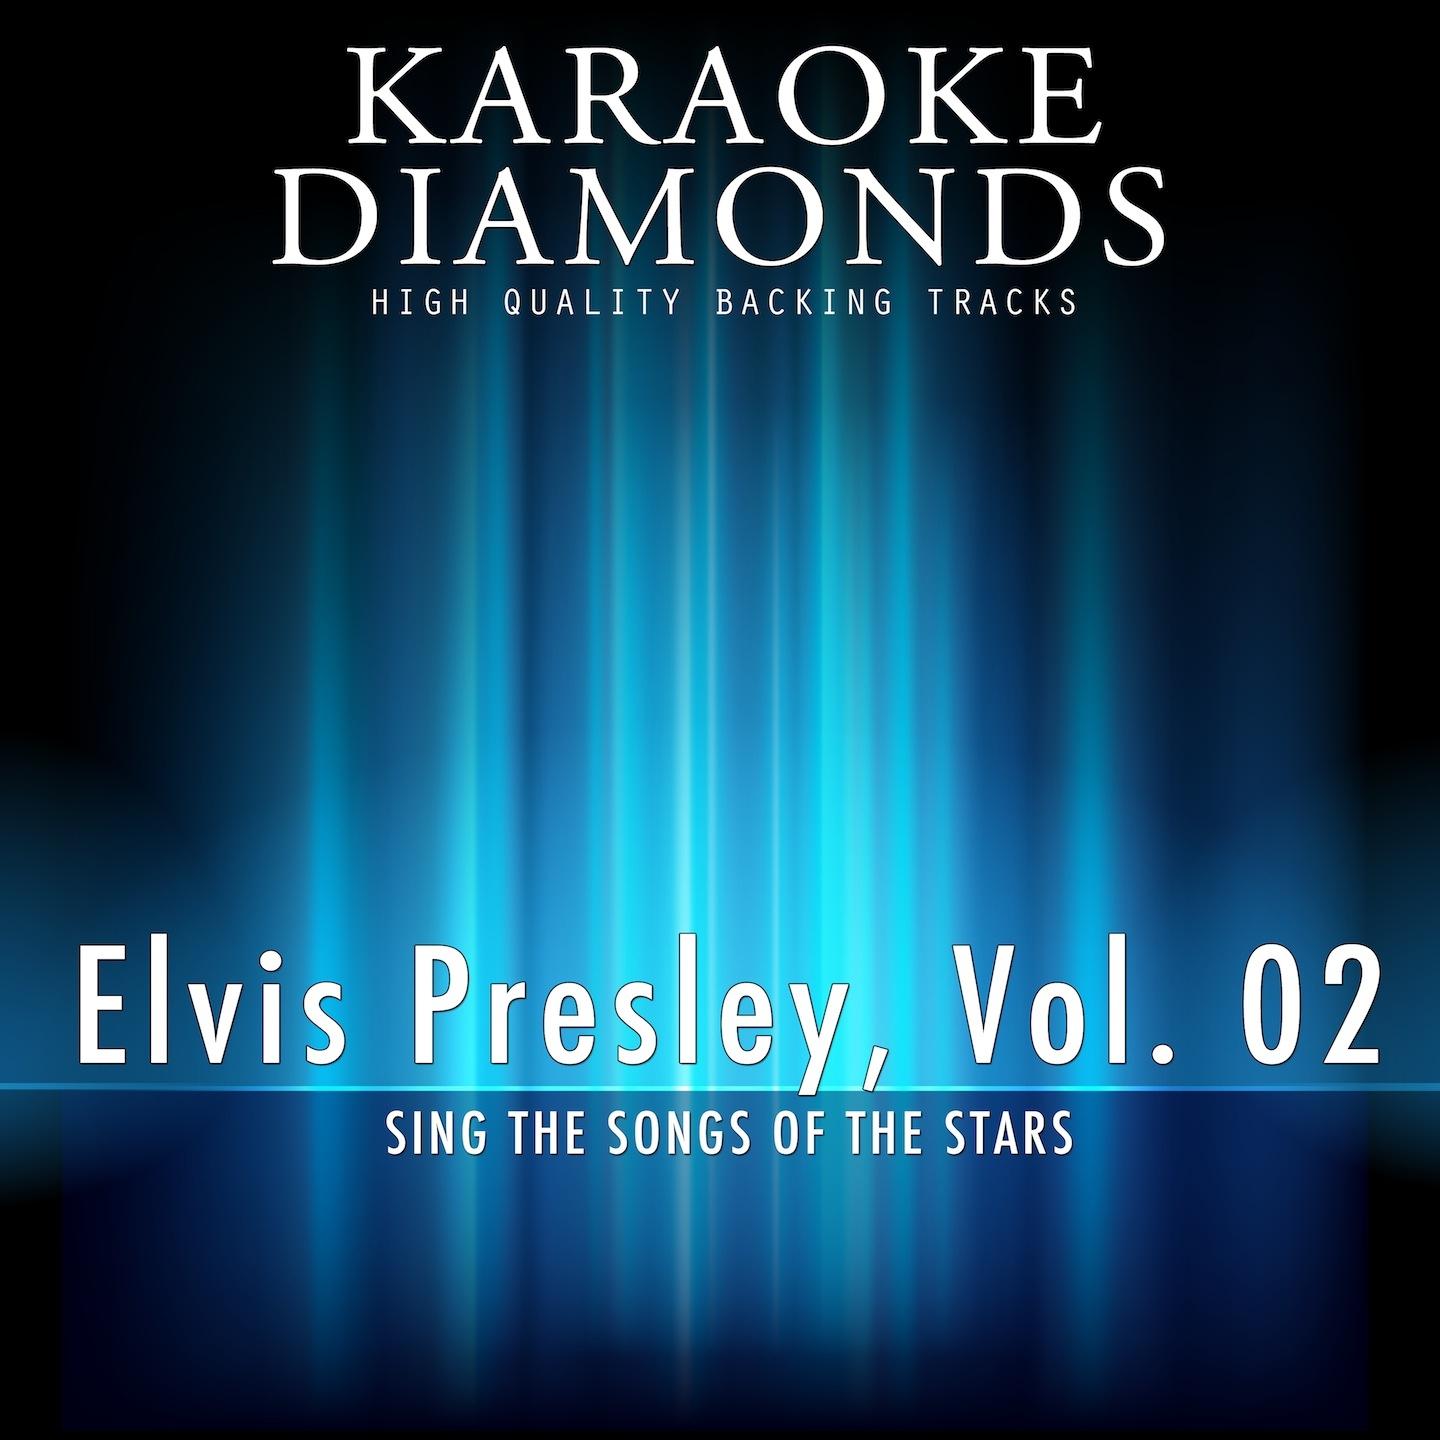 Are You Lonesome Toniight (Karaoke Version In the Style of Elvis Presley)